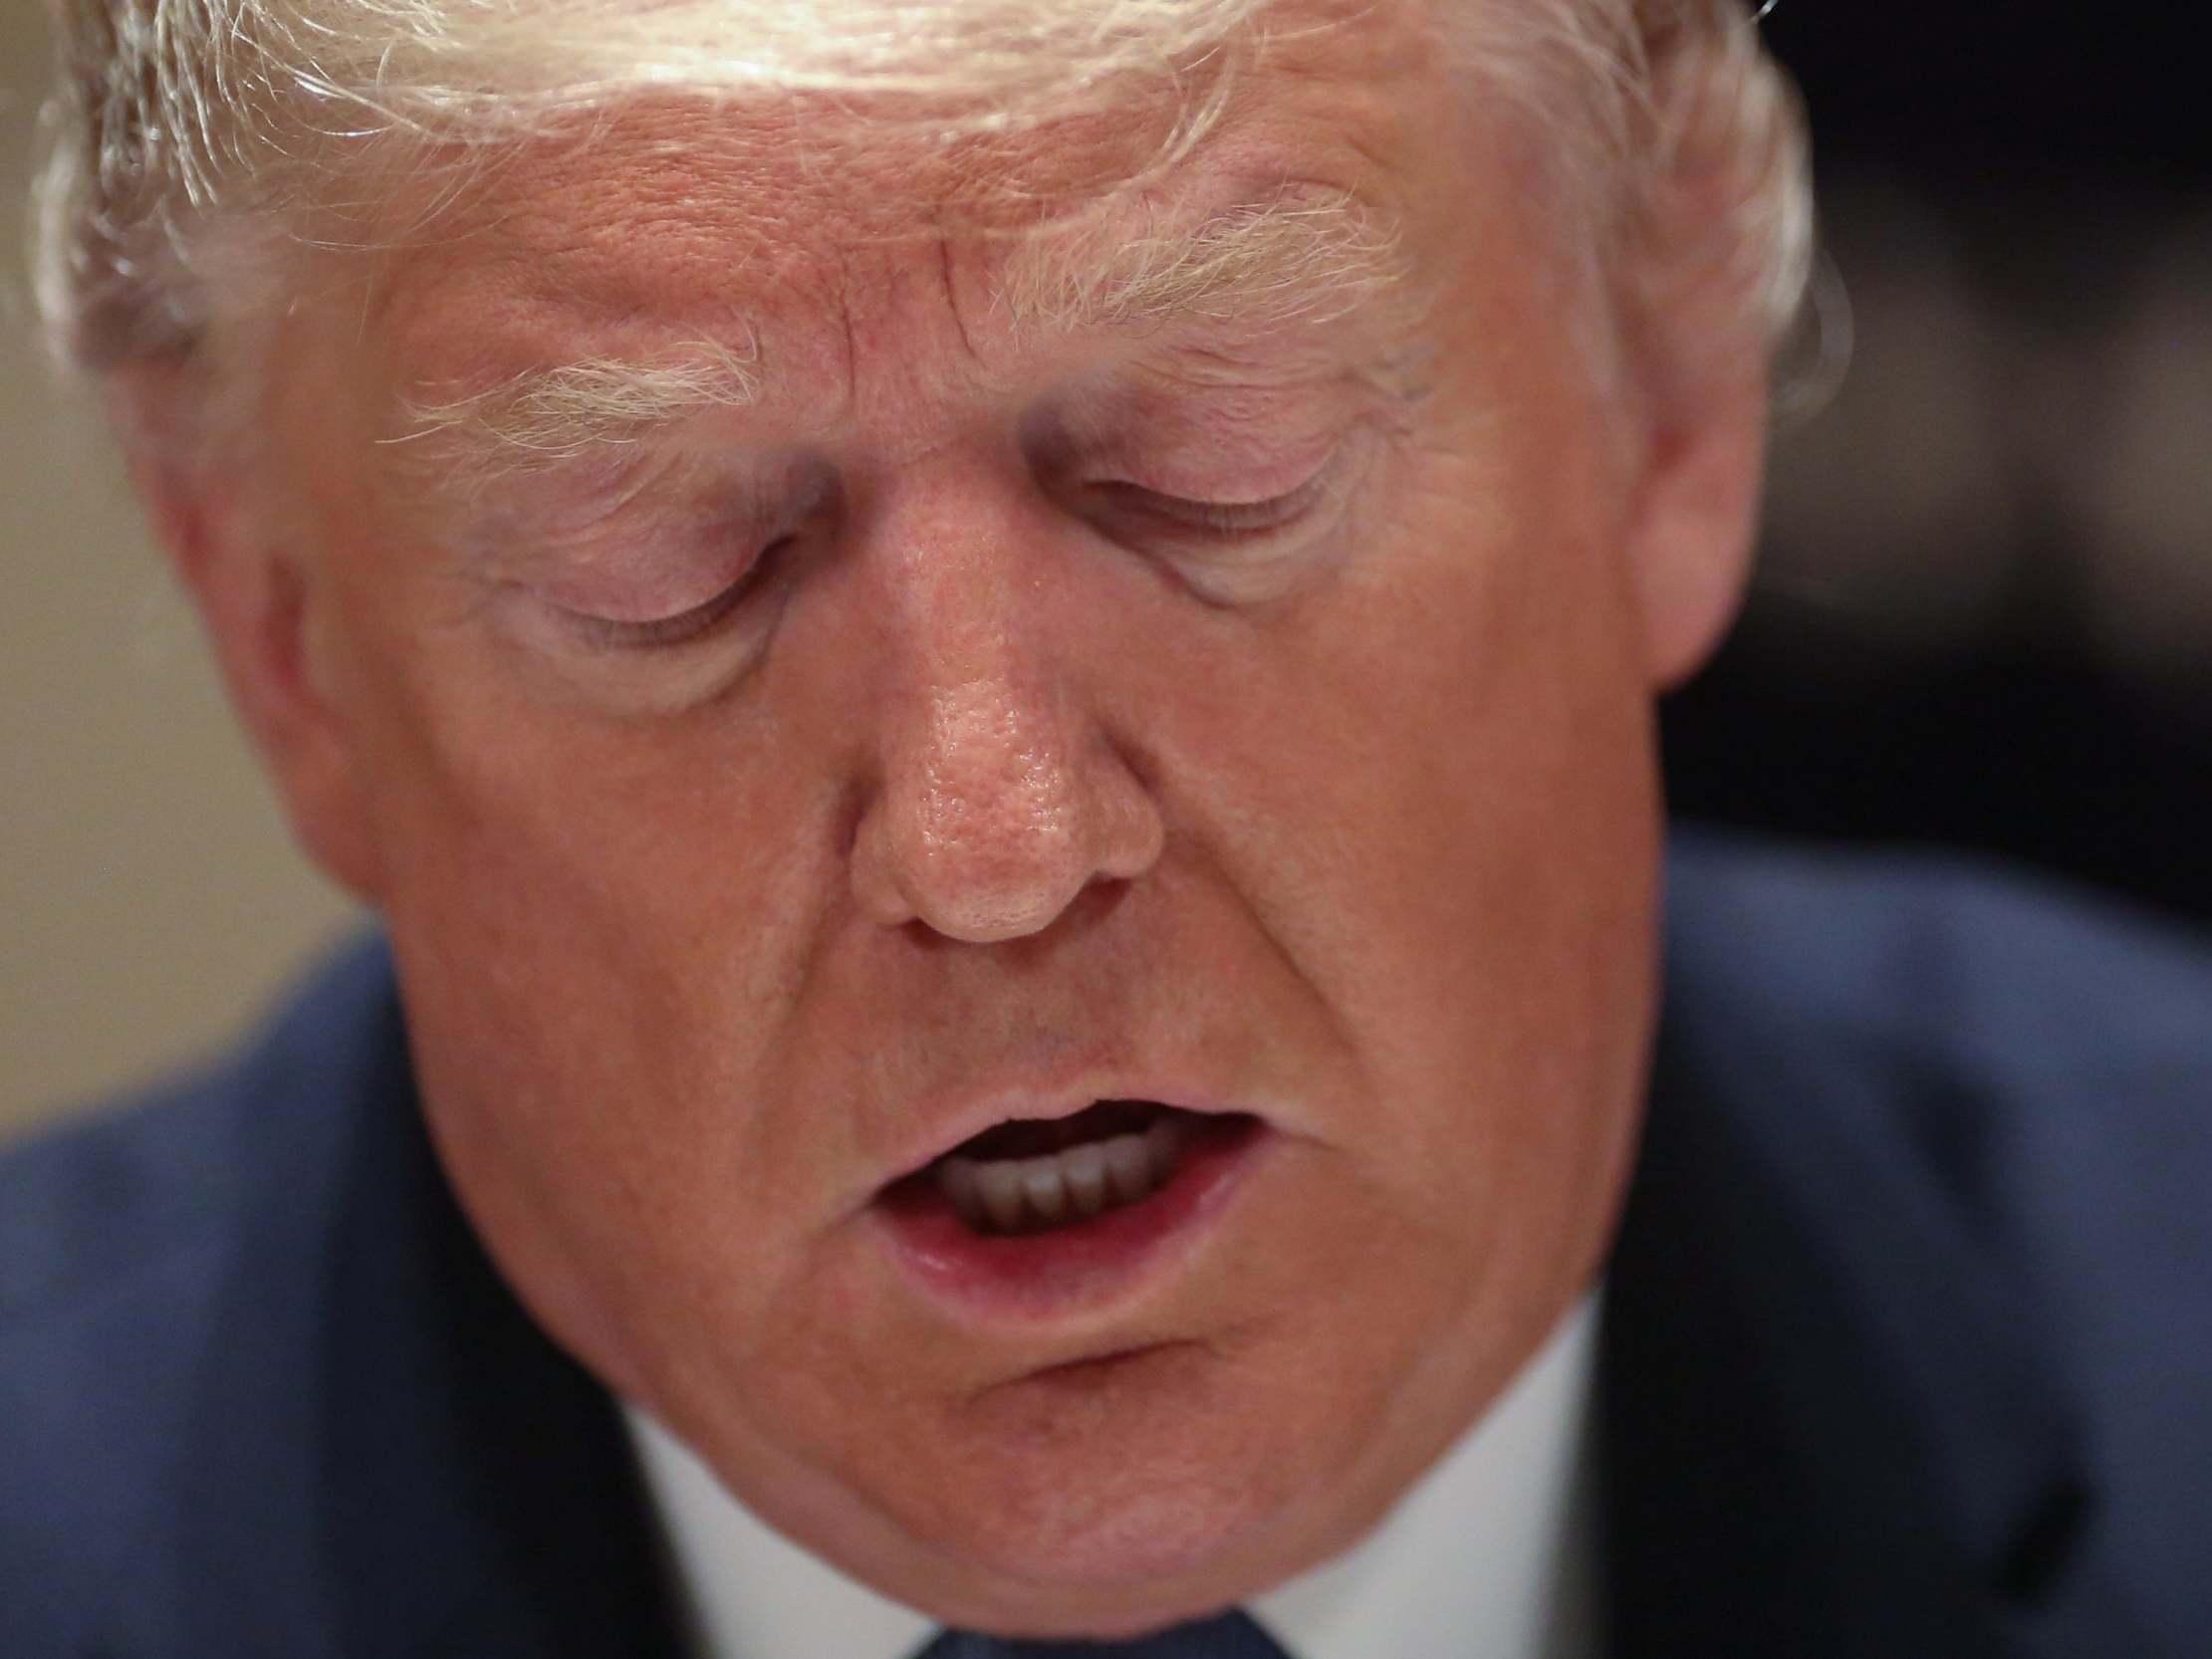 Trump impeachment news – live: President faces imminent deadline with Congress poised to launch articles next week, amid warning 'civilisation as we know it at stake'